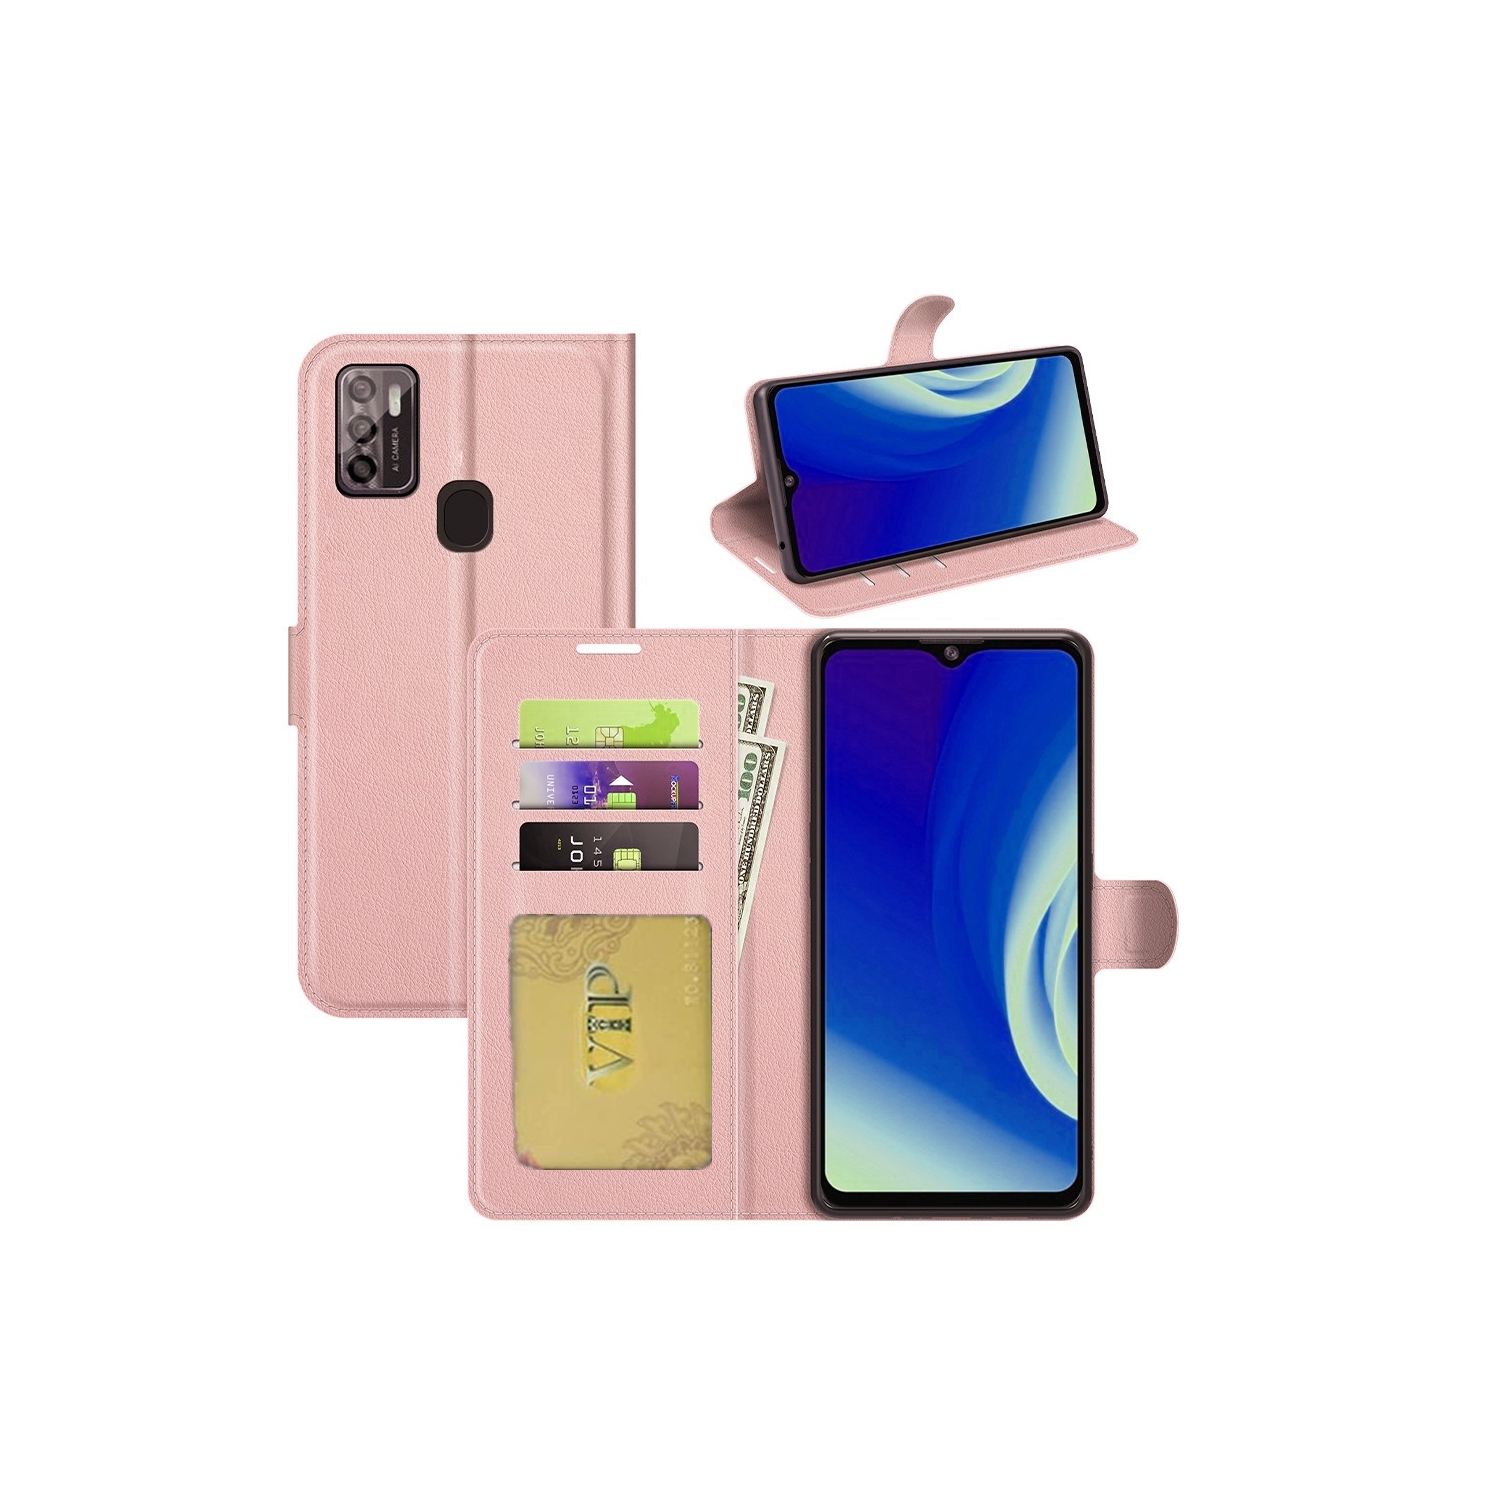 [CS] ZTE Blade A7P Case, Magnetic Leather Folio Wallet Flip Case Cover with Card Slot, Rose Gold